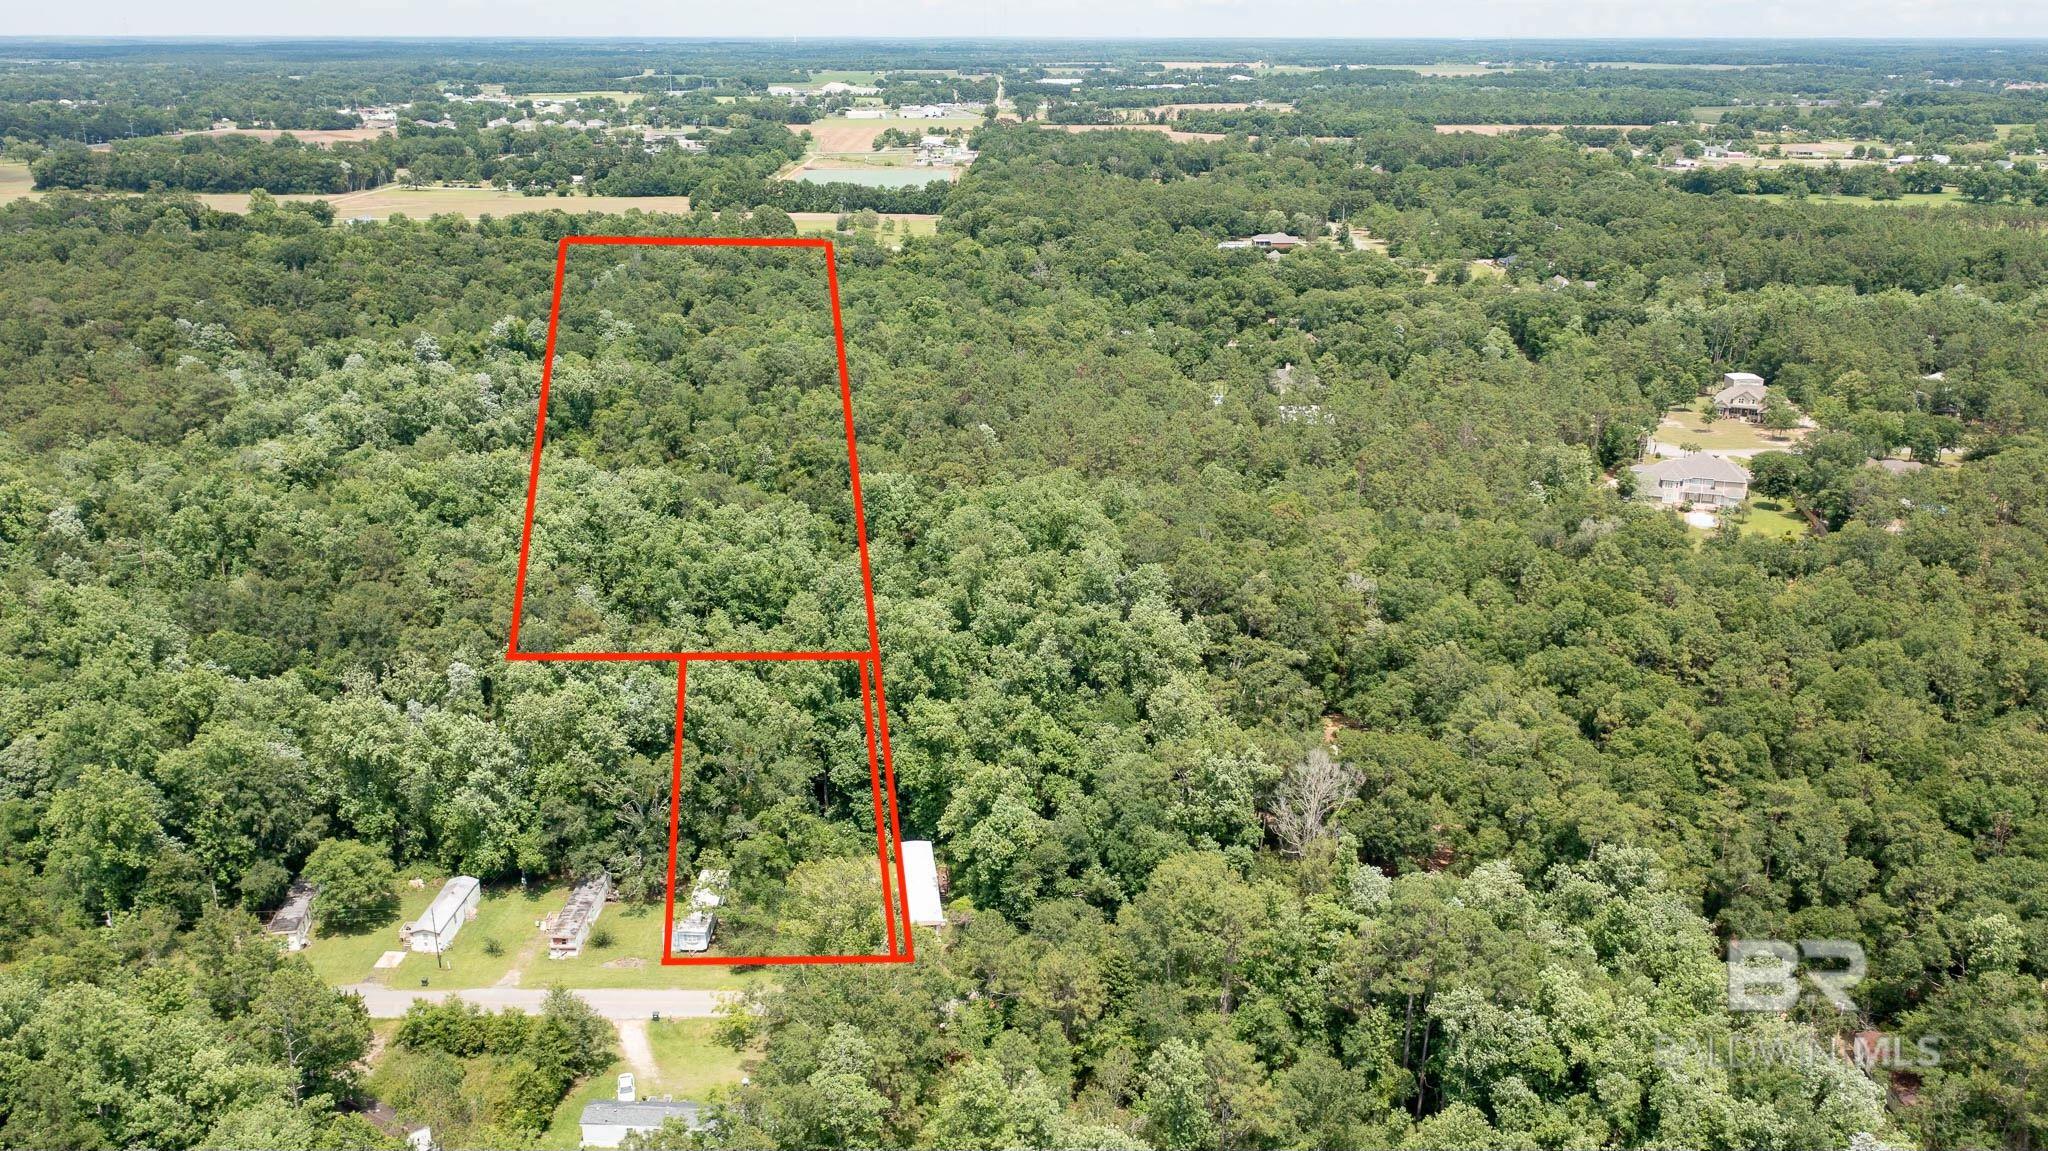 Great location in the heart of Loxley. 10.6 beautiful acres ready for you to build your beautiful dream home. Many possibilities with this property. Property to be sold with the .68 acre PPIN# 103660 lot and .07 acre PPIN# 111366 lot. There is a Mobile home on the .68 acre lot and to be sold at NO value. Please do not enter the Mobile home due to Safety Hazard. There is a New Survey in MLS Documents. Offers only to be considered with adjacent lots . All information deemed reliable but not guaranteed. Buyer to verify all information deemed pertinent.